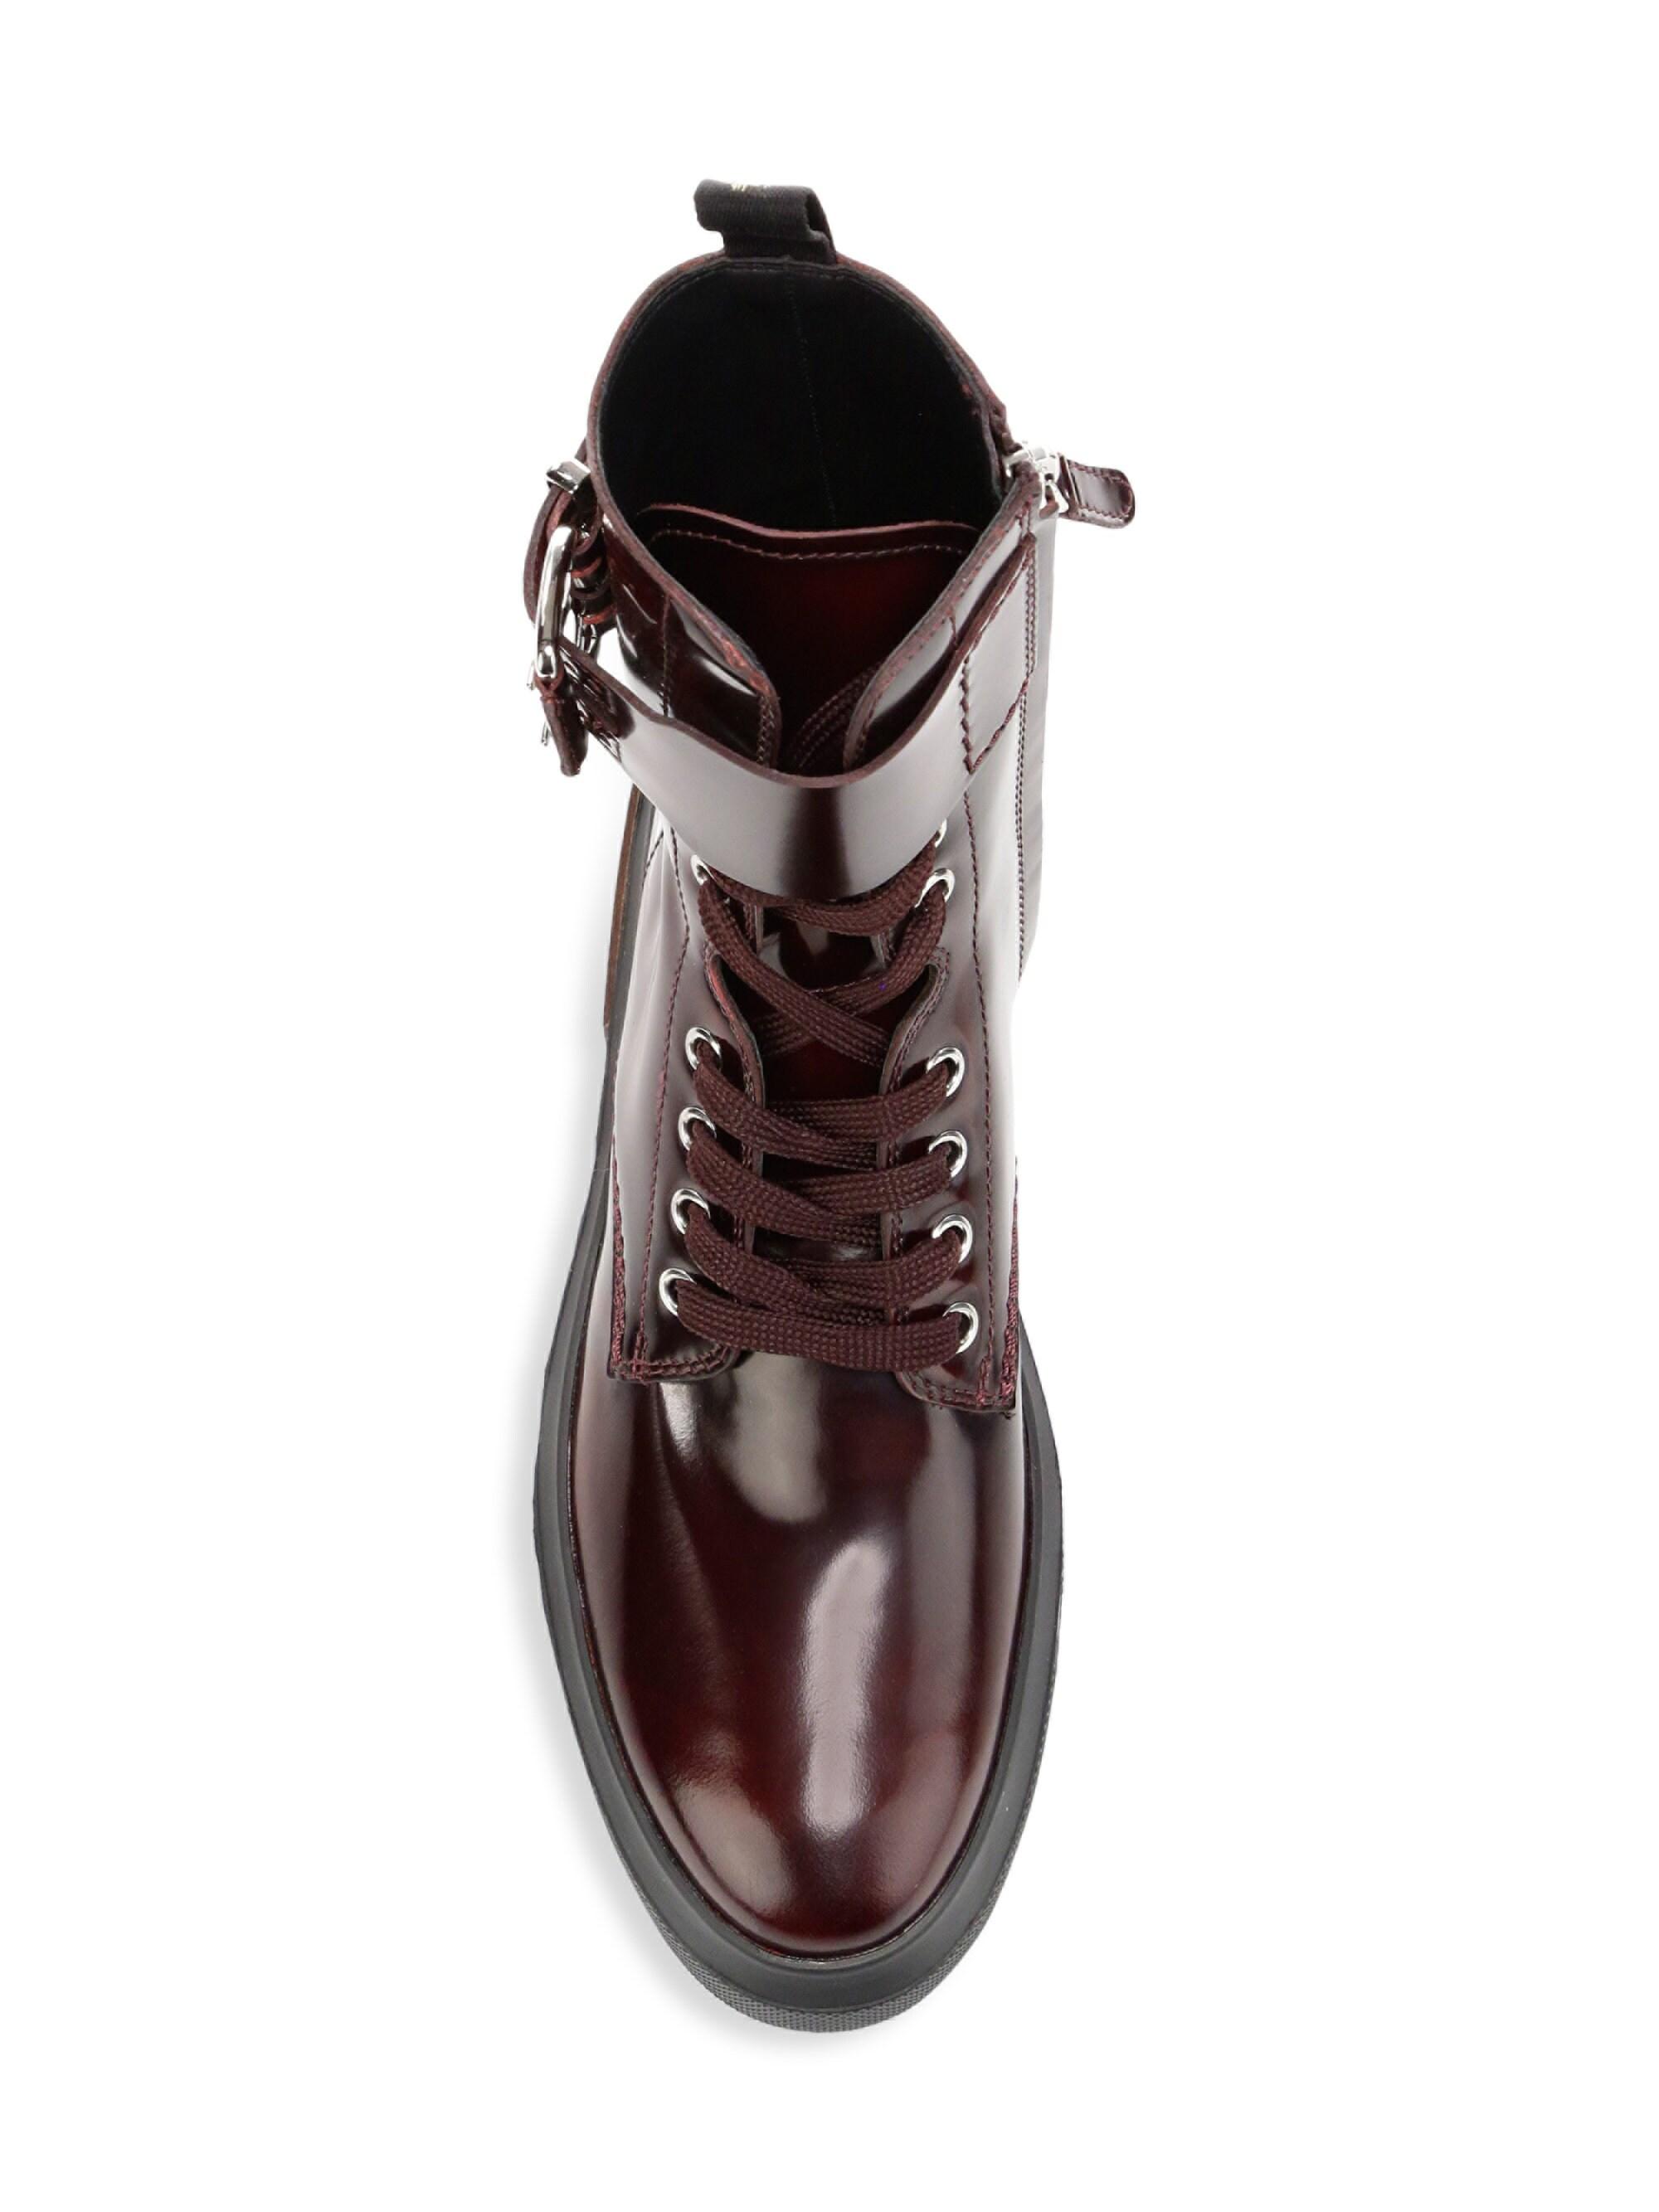 Tods EZBC025005 Womens Burgundy Patent Leather Lace-up Shoes 